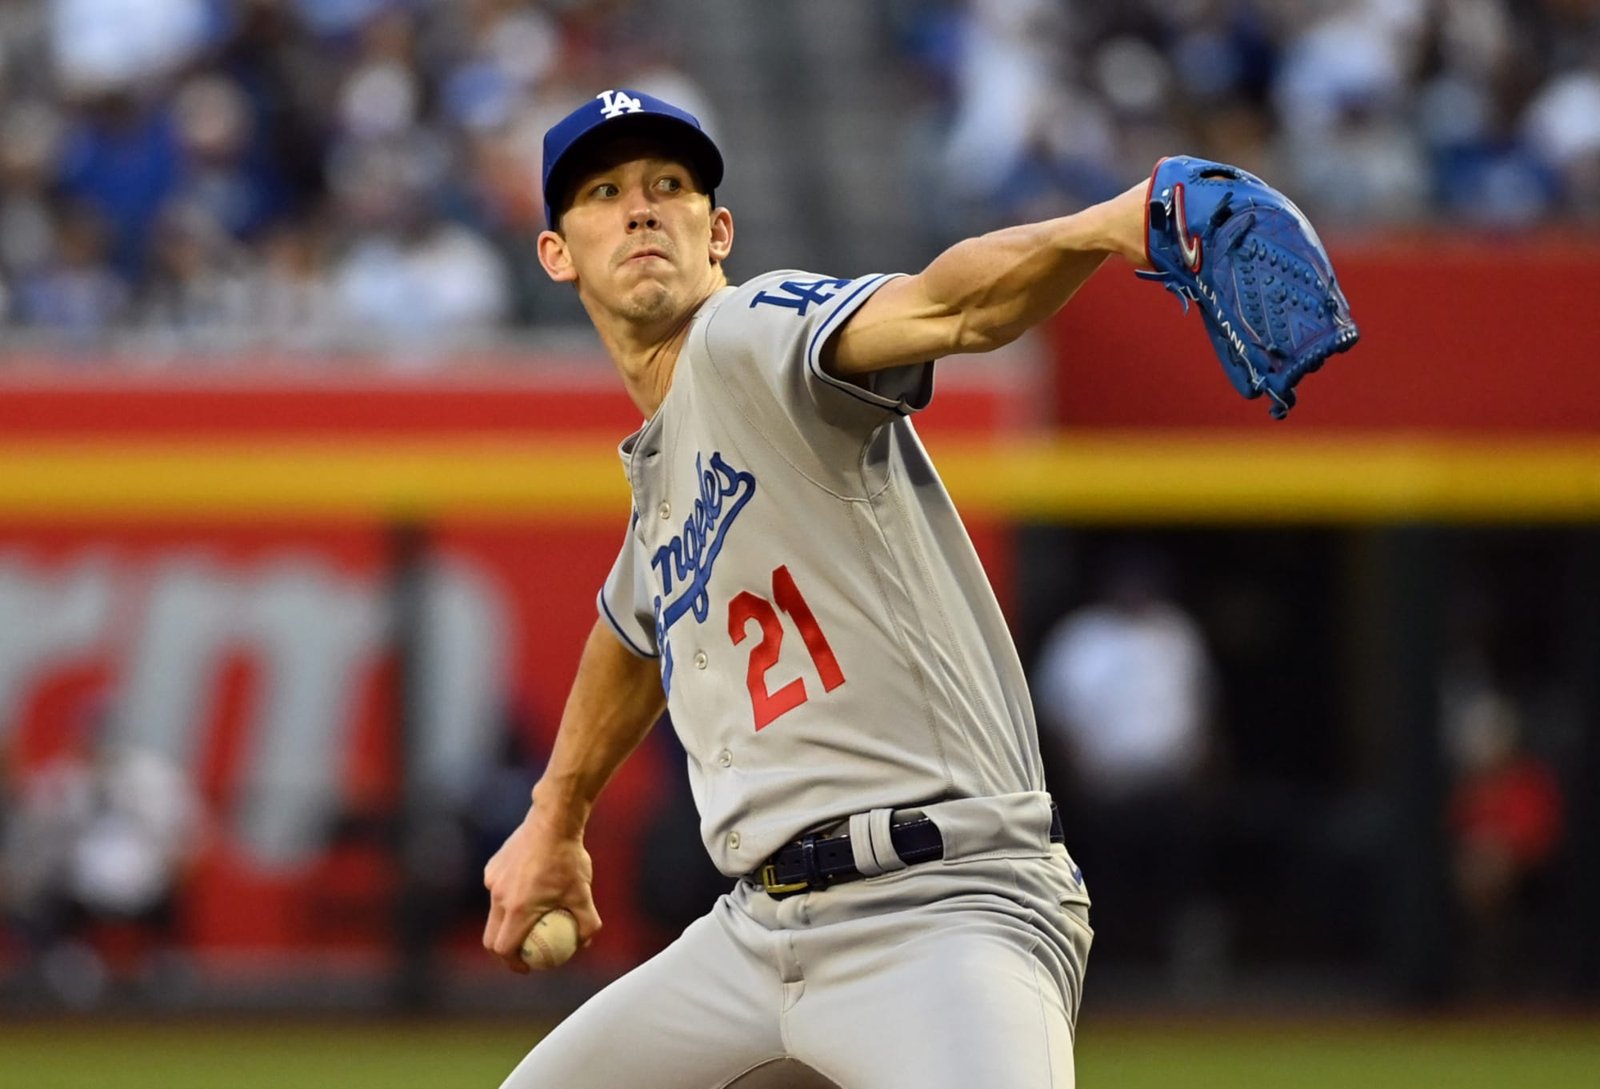 Why Dave Roberts pulled Clayton Kershaw, but not Walker Buehler